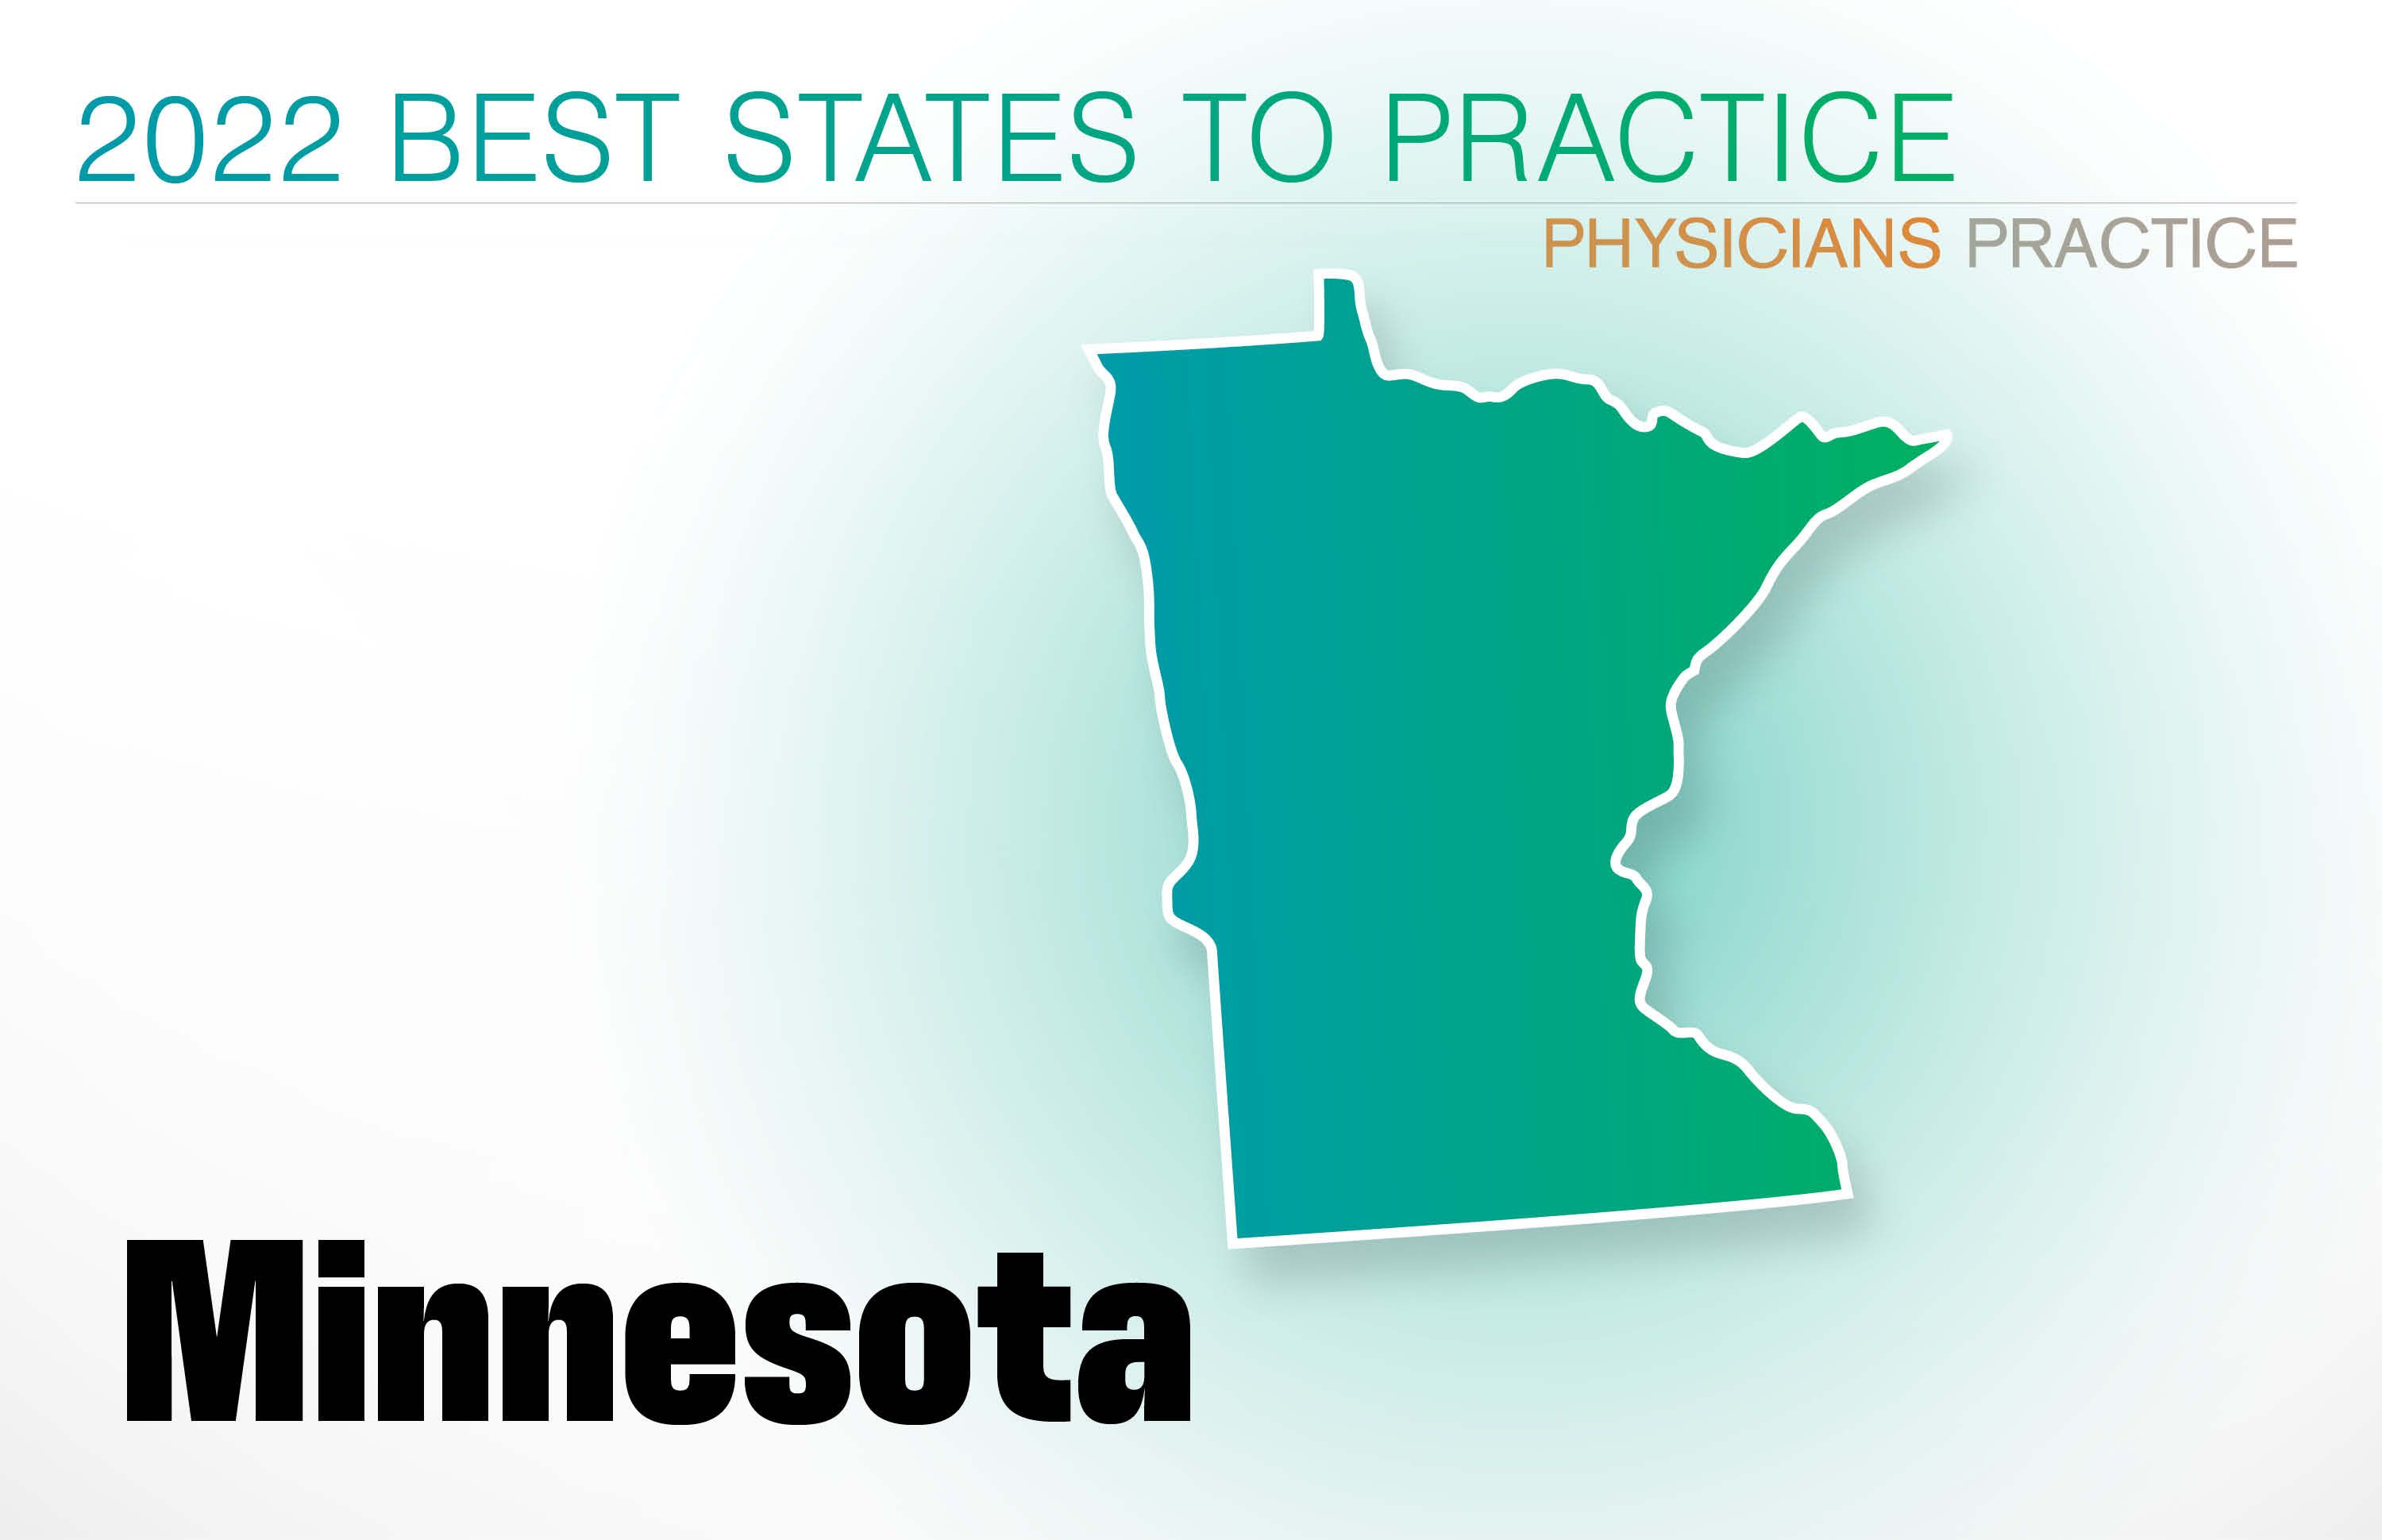 #19 Minnesota Rankings: Cost of living: 26 Physician density: 39 Amount of state business taxes collected: 45 Average malpractice insurance rates: 2 Quality of life: 5 GPCI: 9